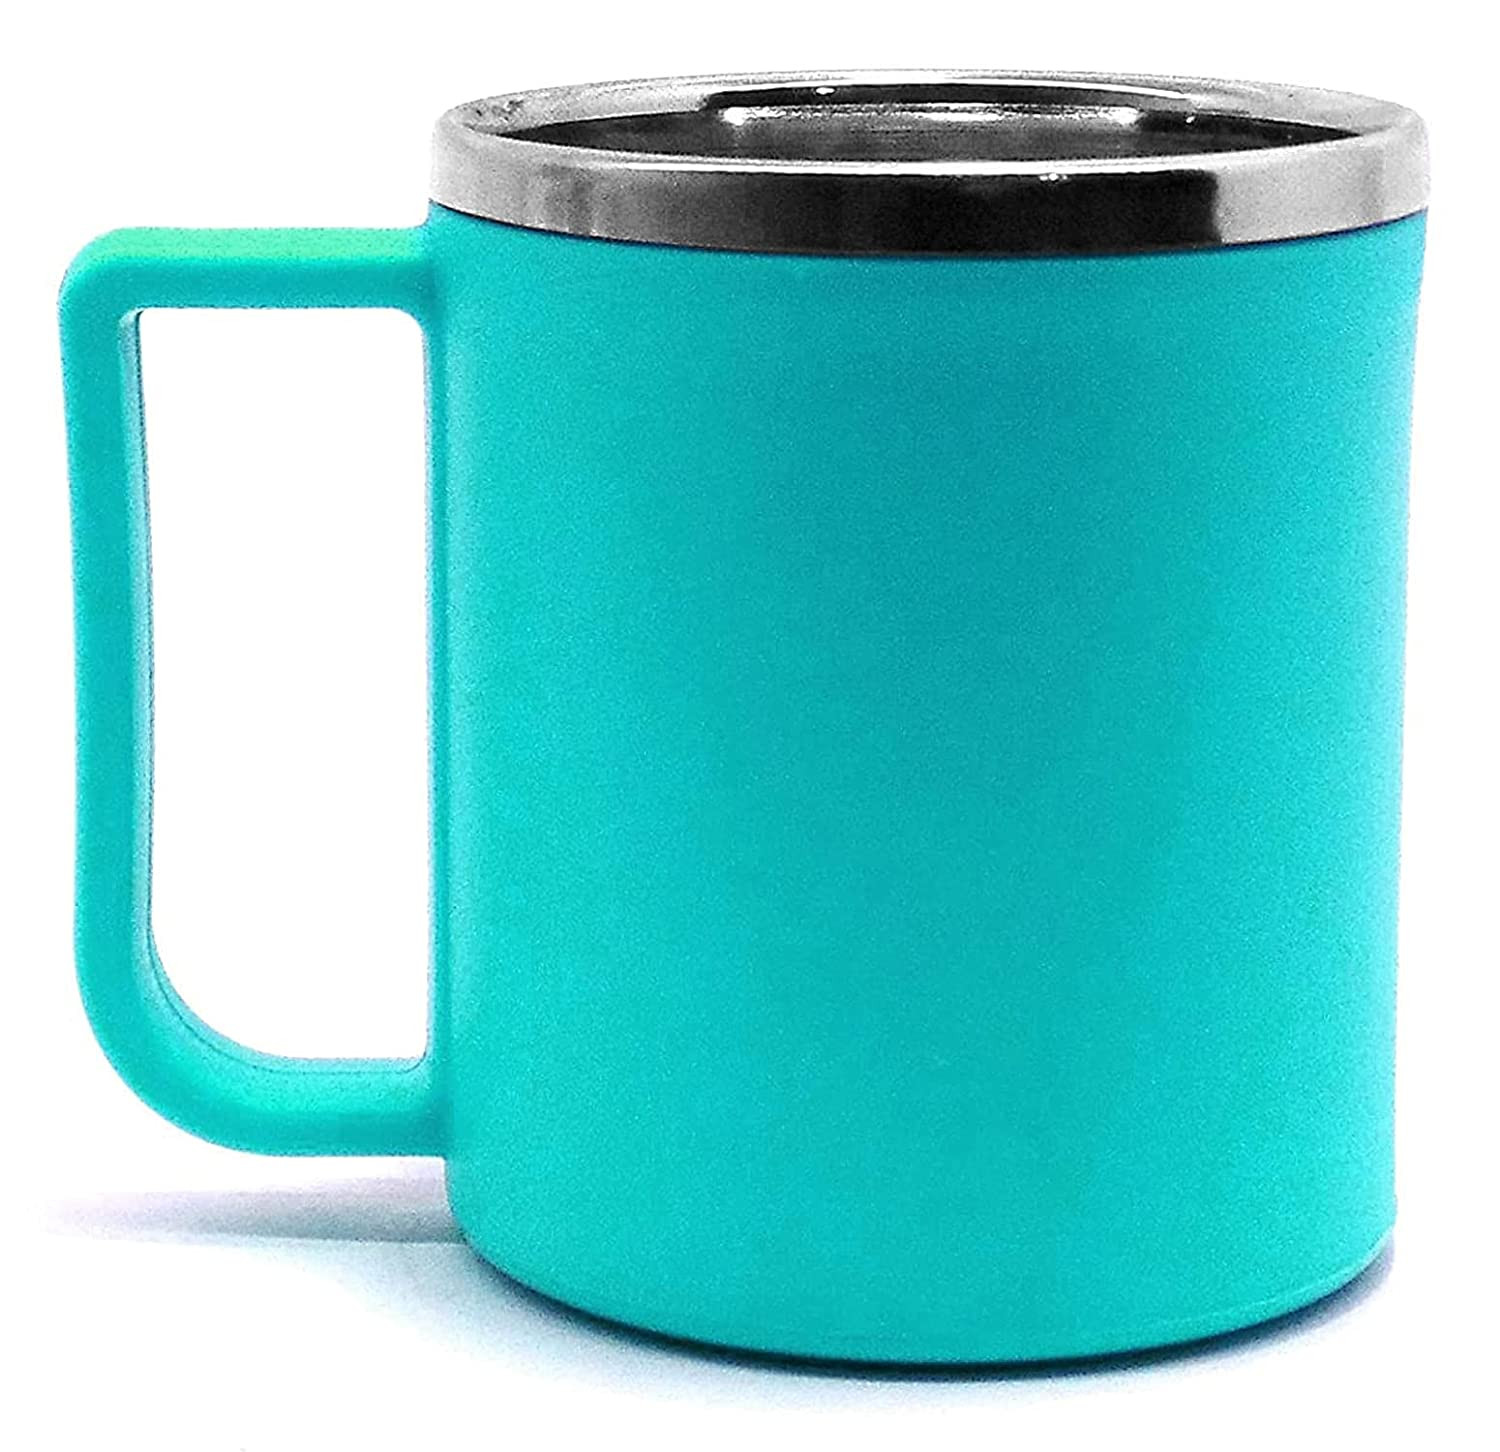 Kuber Industries Medium Size Plastic Steel Cups for Coffee Tea Cocoa, Camping Mugs with Handle, Portable & Easy Clean,(Green)